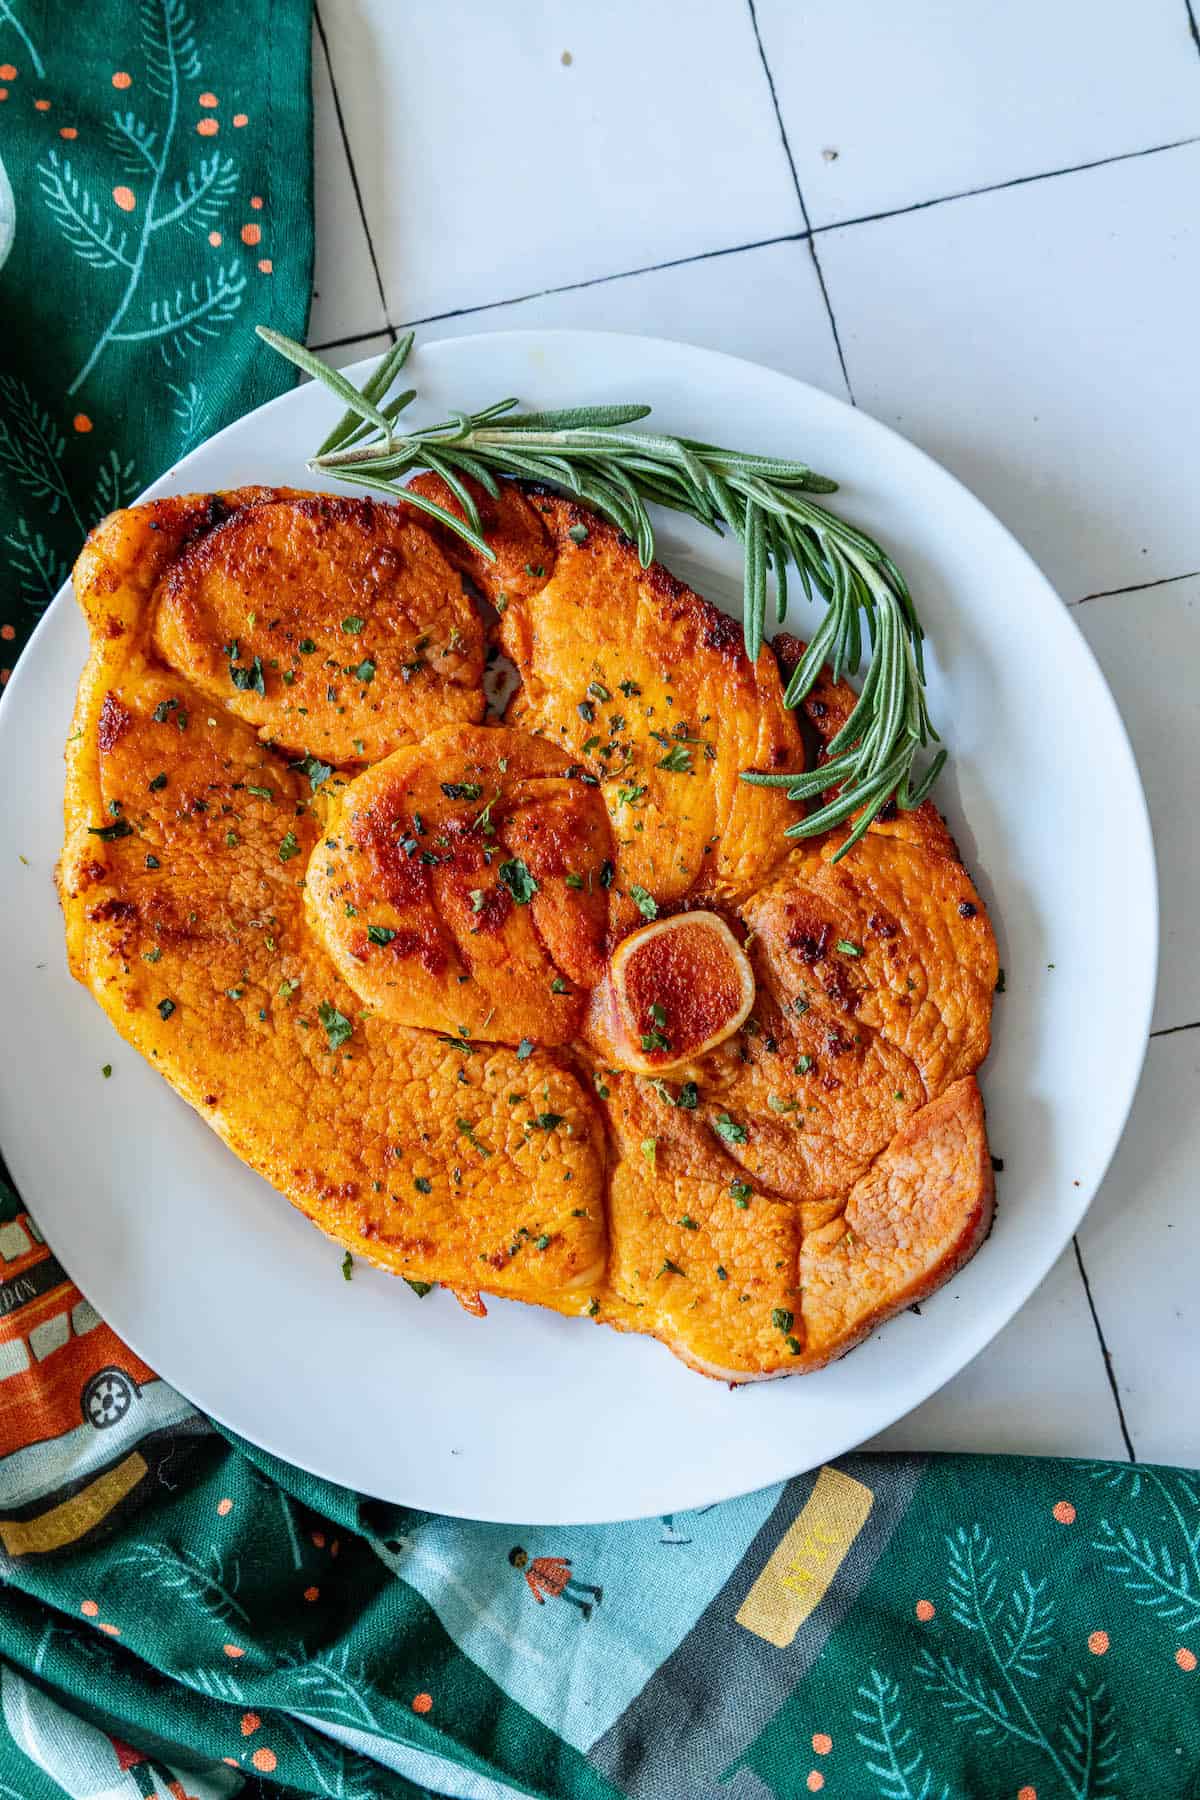 A plate of roasted sweet potatoes with rosemary sprigs, cooked in a skillet.